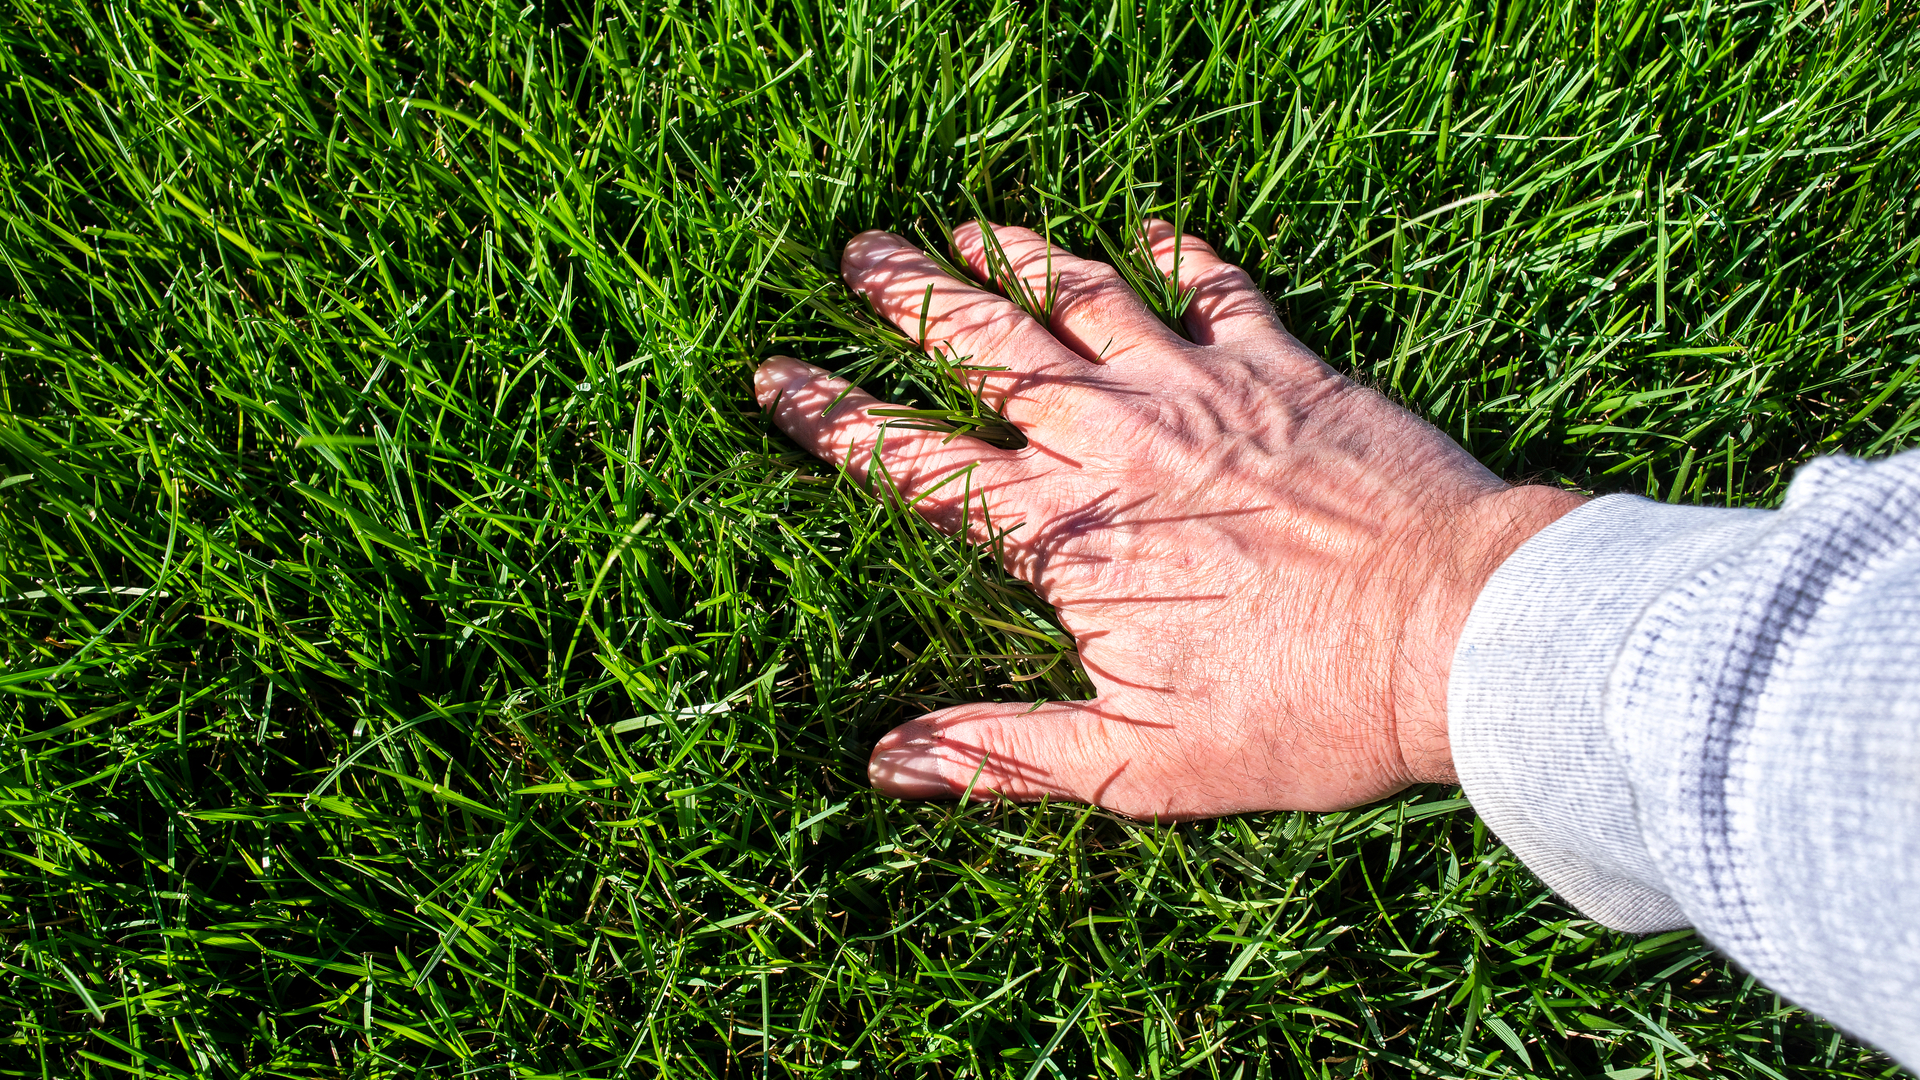 Red Spots on Your Lawn: What Are They & What Should You Do About Them?